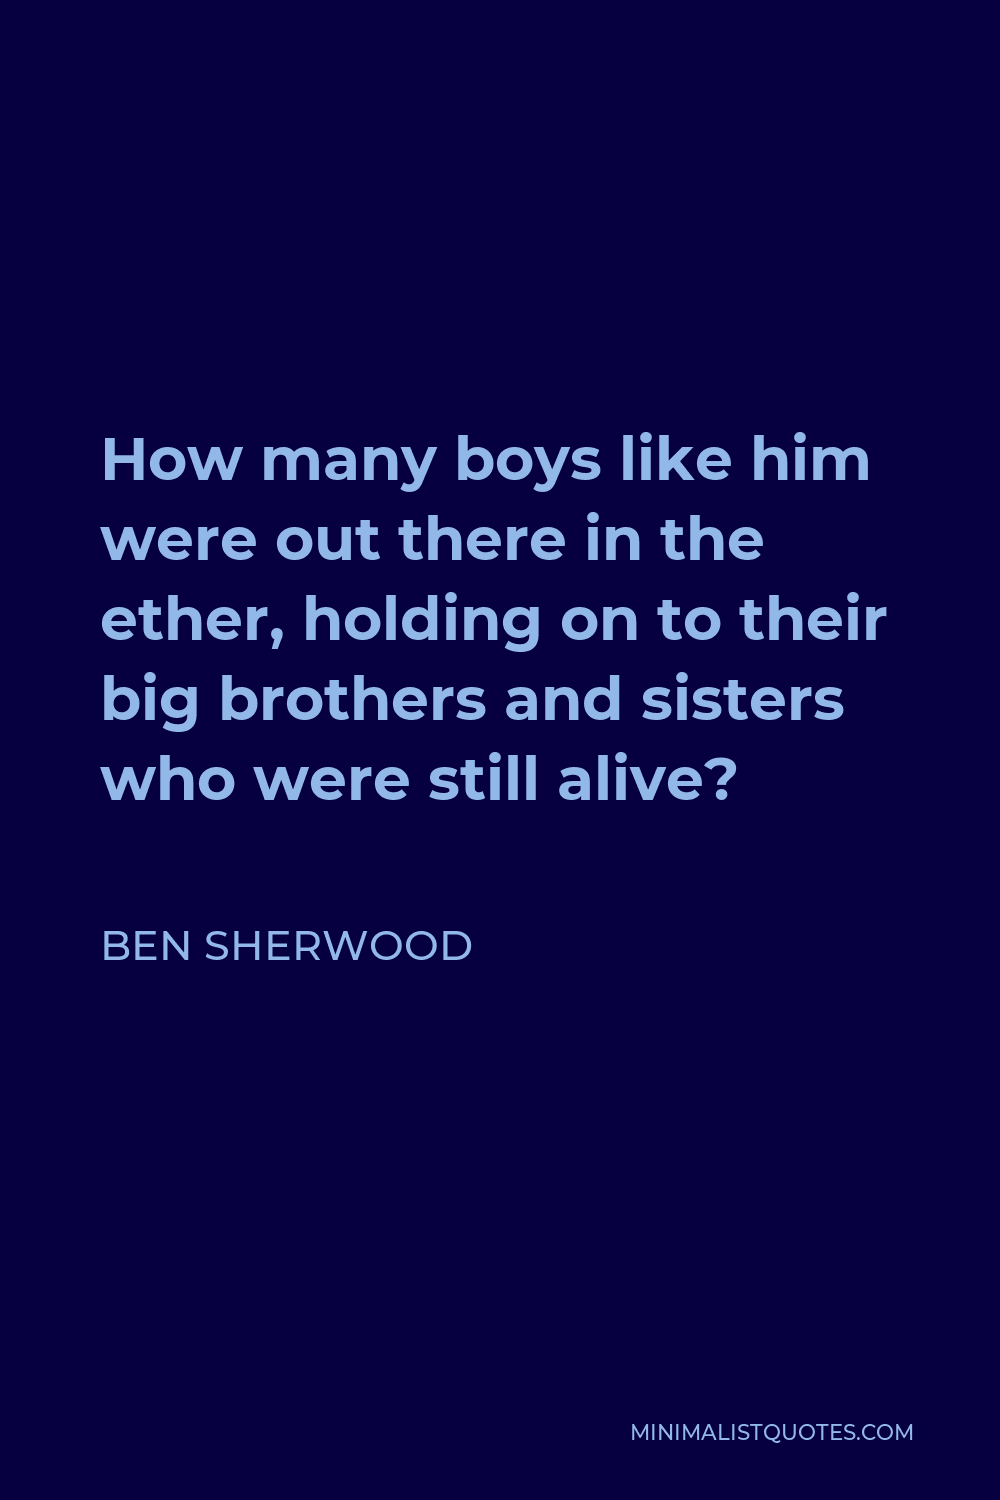 Ben Sherwood Quote - How many boys like him were out there in the ether, holding on to their big brothers and sisters who were still alive?